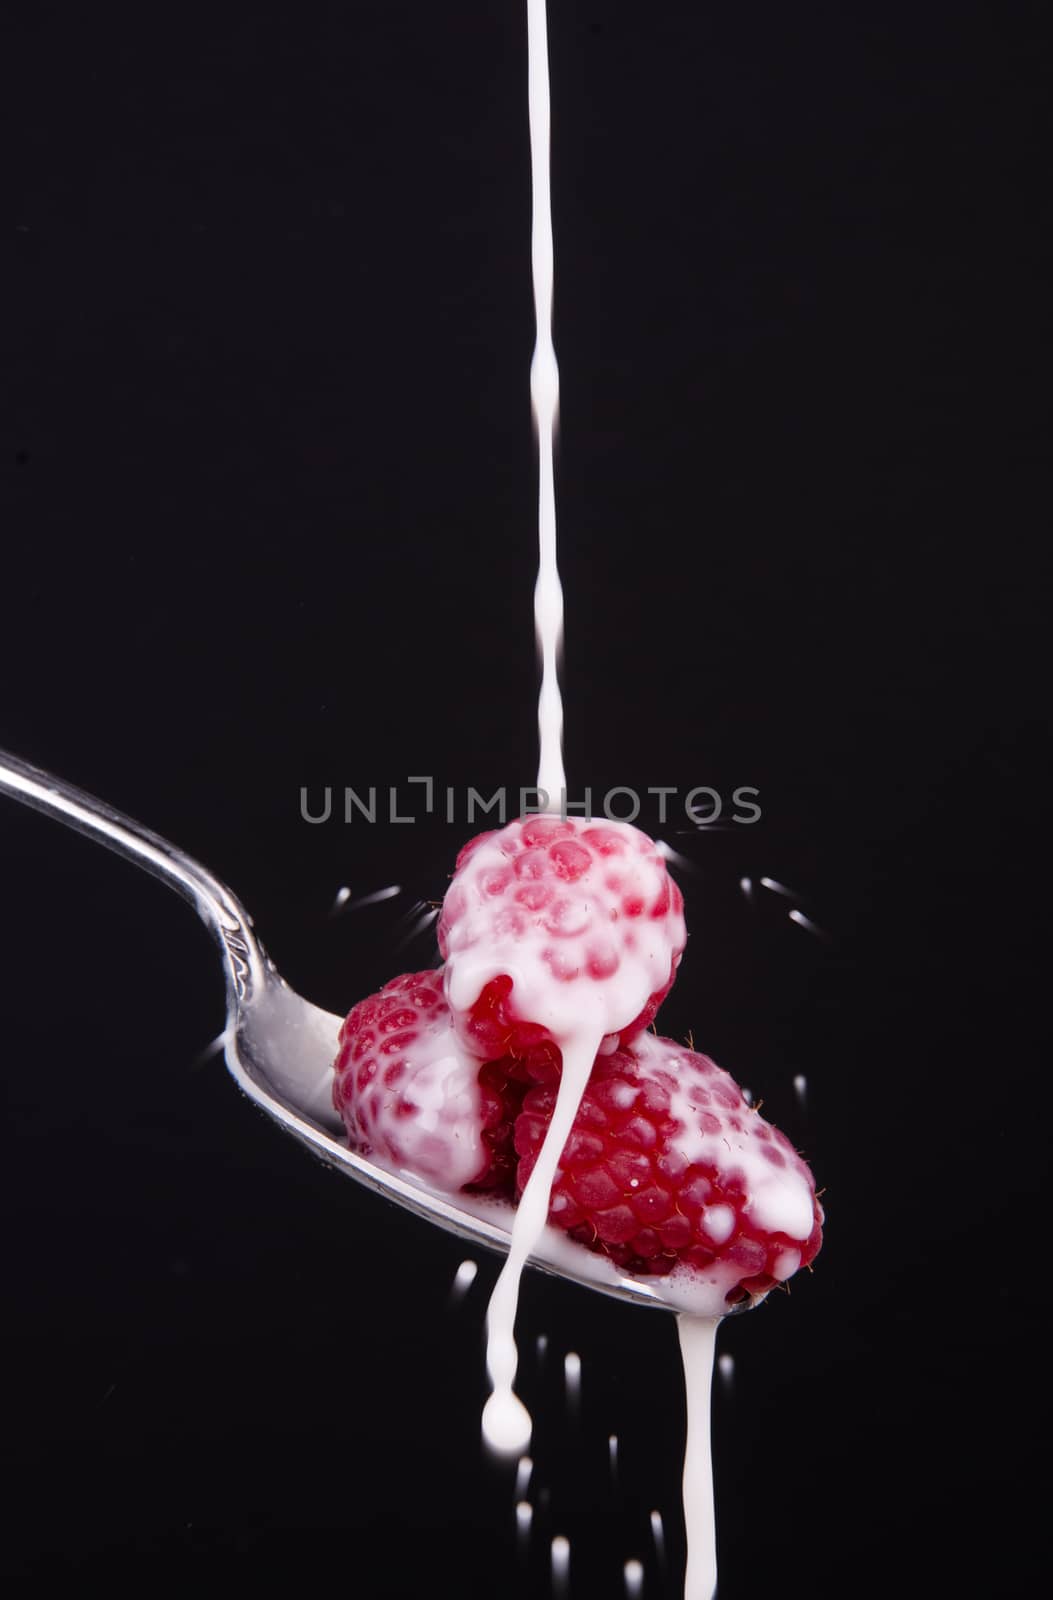 Food Fruit Raspberries Milk Drop on Them While Sitting Spoon by ChrisBoswell